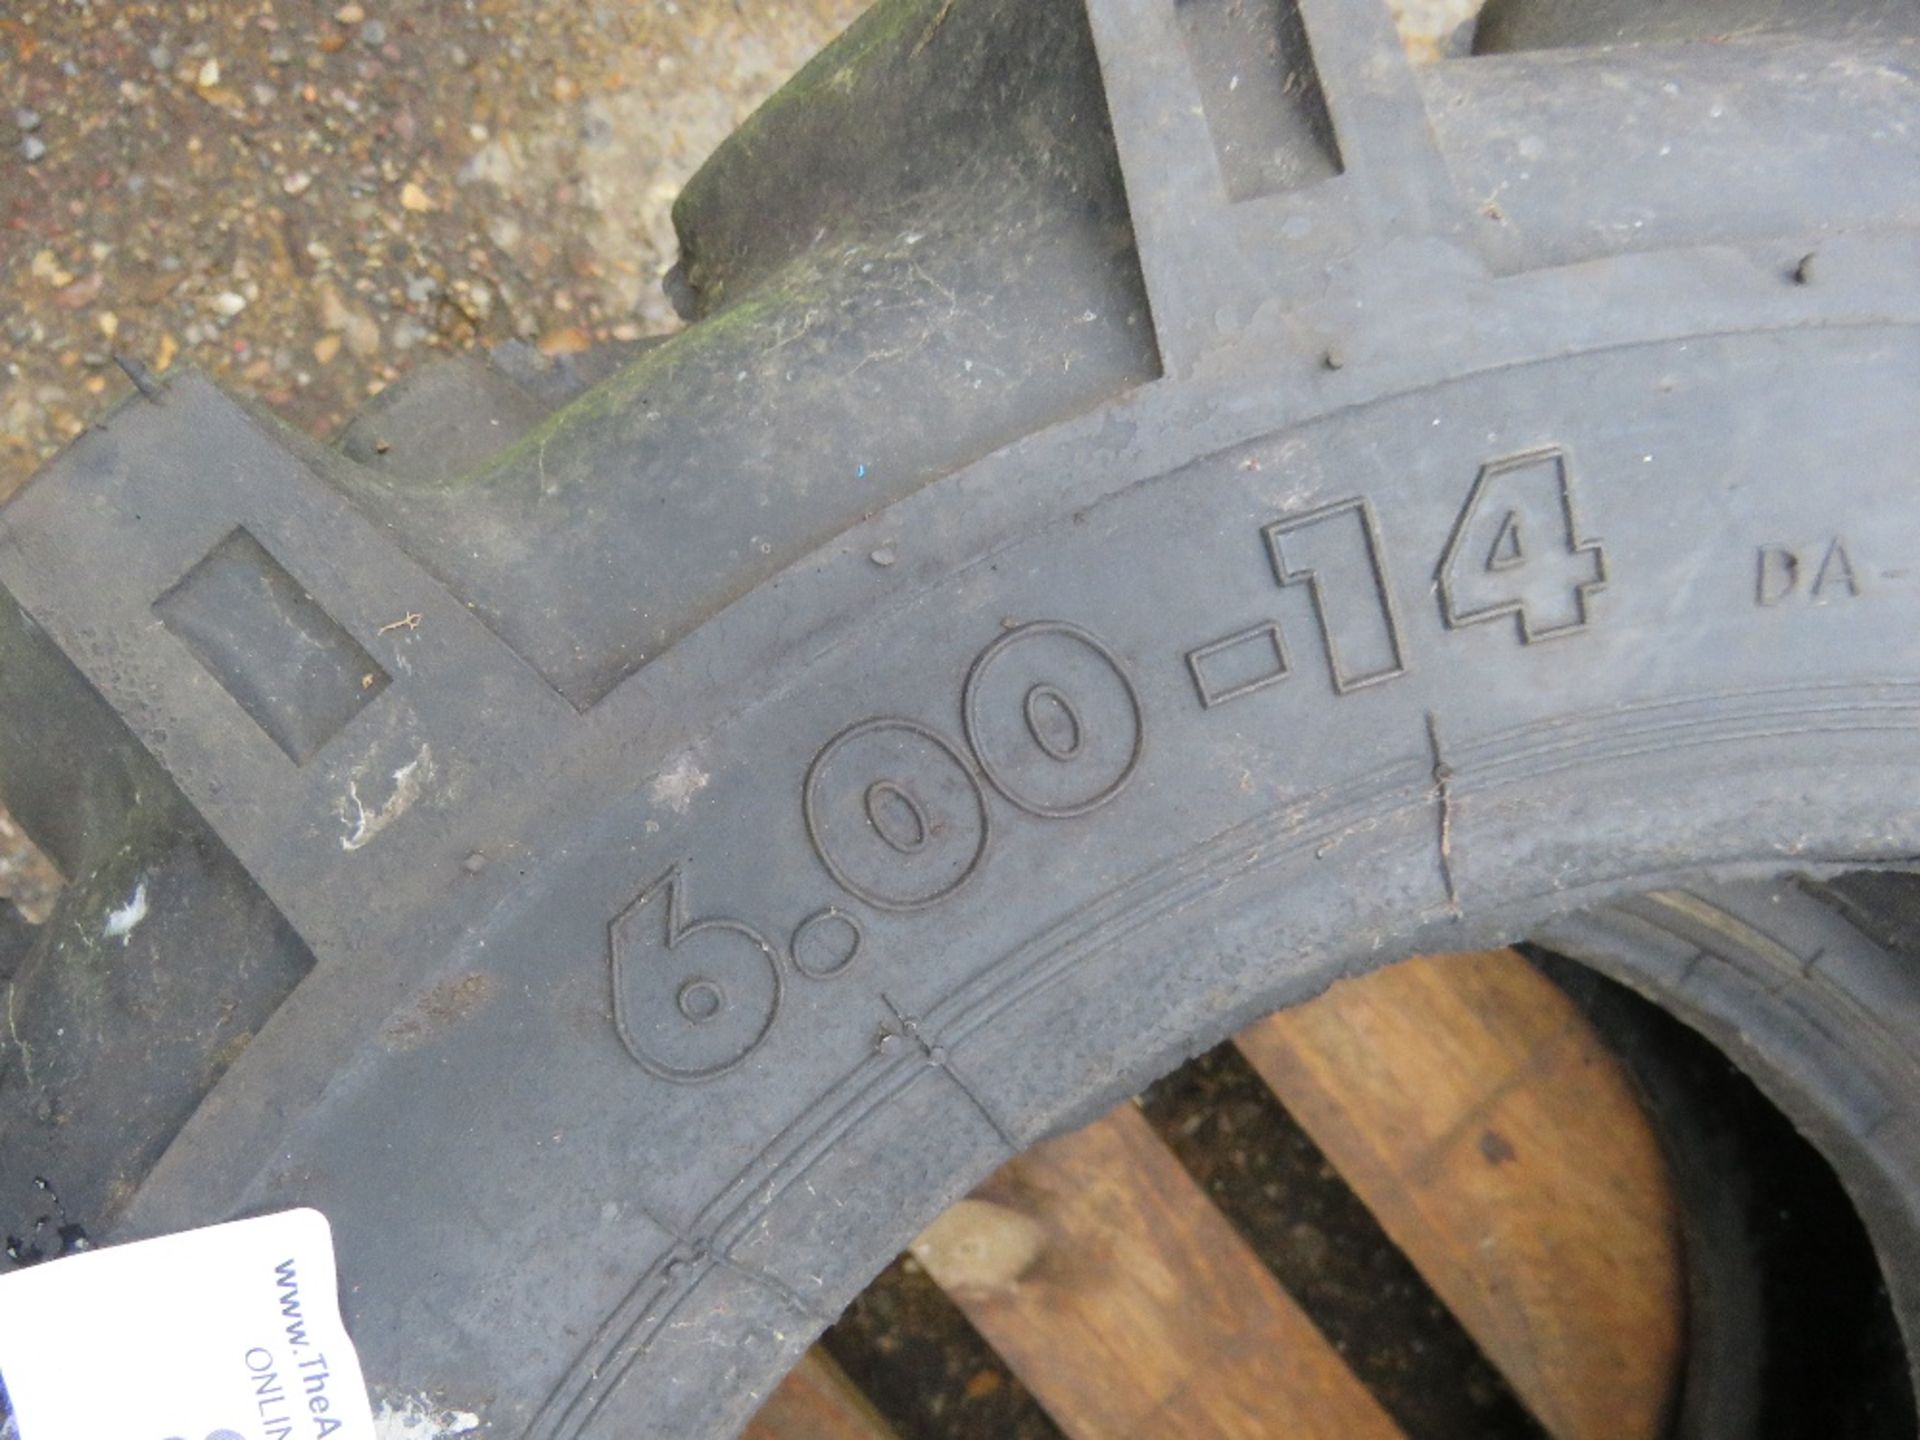 4NO 6.00-14 AGRICULTURAL COMPACT TRACTOR TYRES, LITTLE USED. - Image 3 of 3